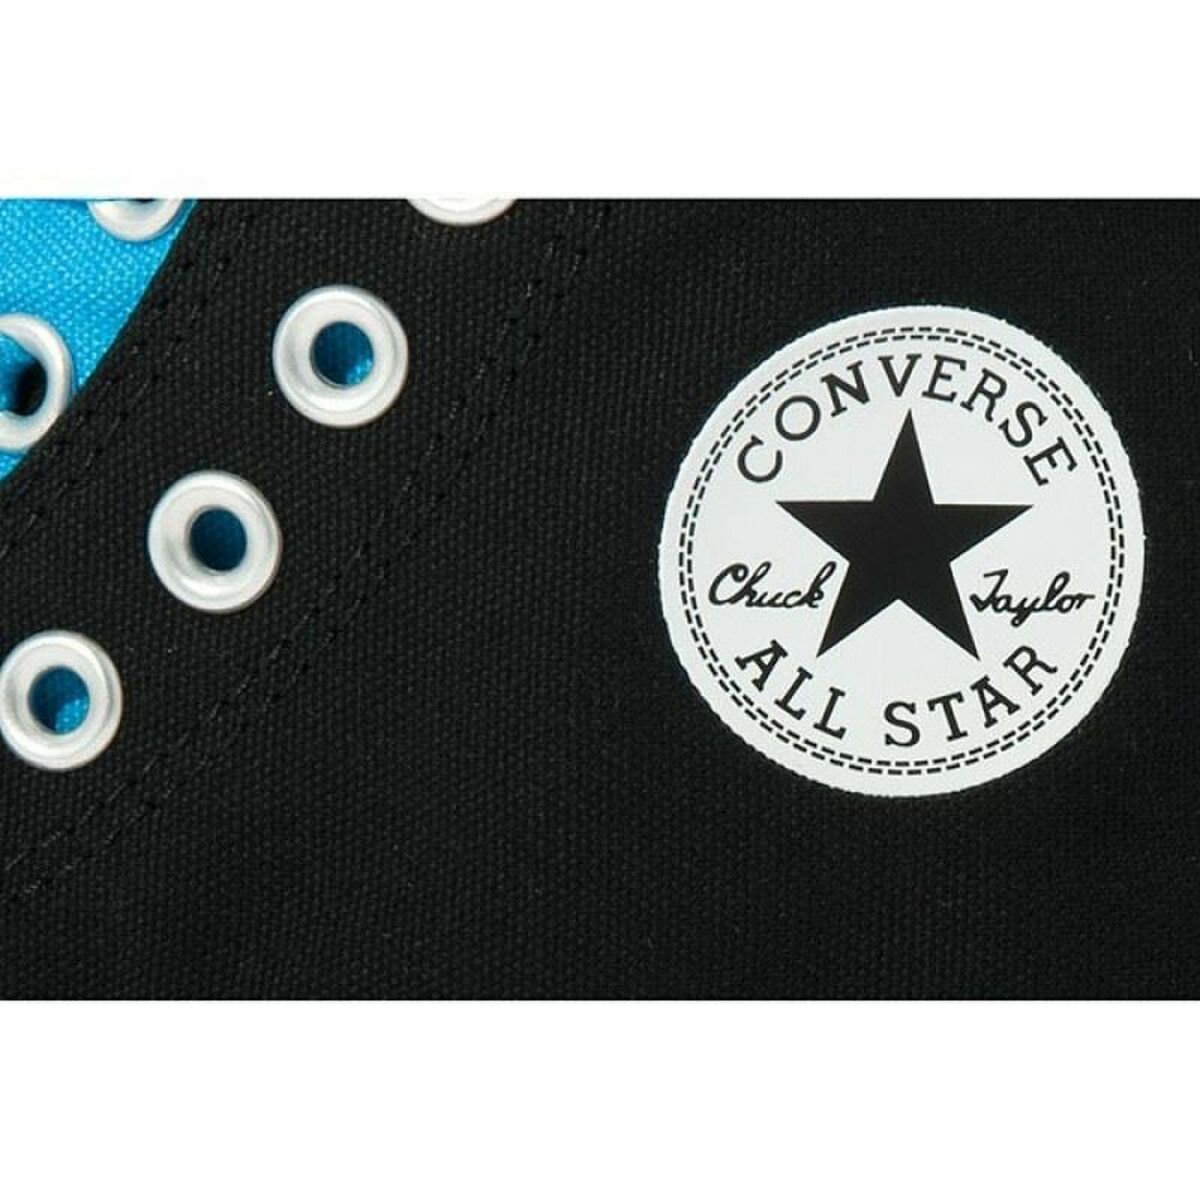 Men'S Trainers Converse Chuck Taylor Double Upper Hi Black-Fashion | Accessories > Clothes and Shoes > Sports shoes-Converse-42-Urbanheer